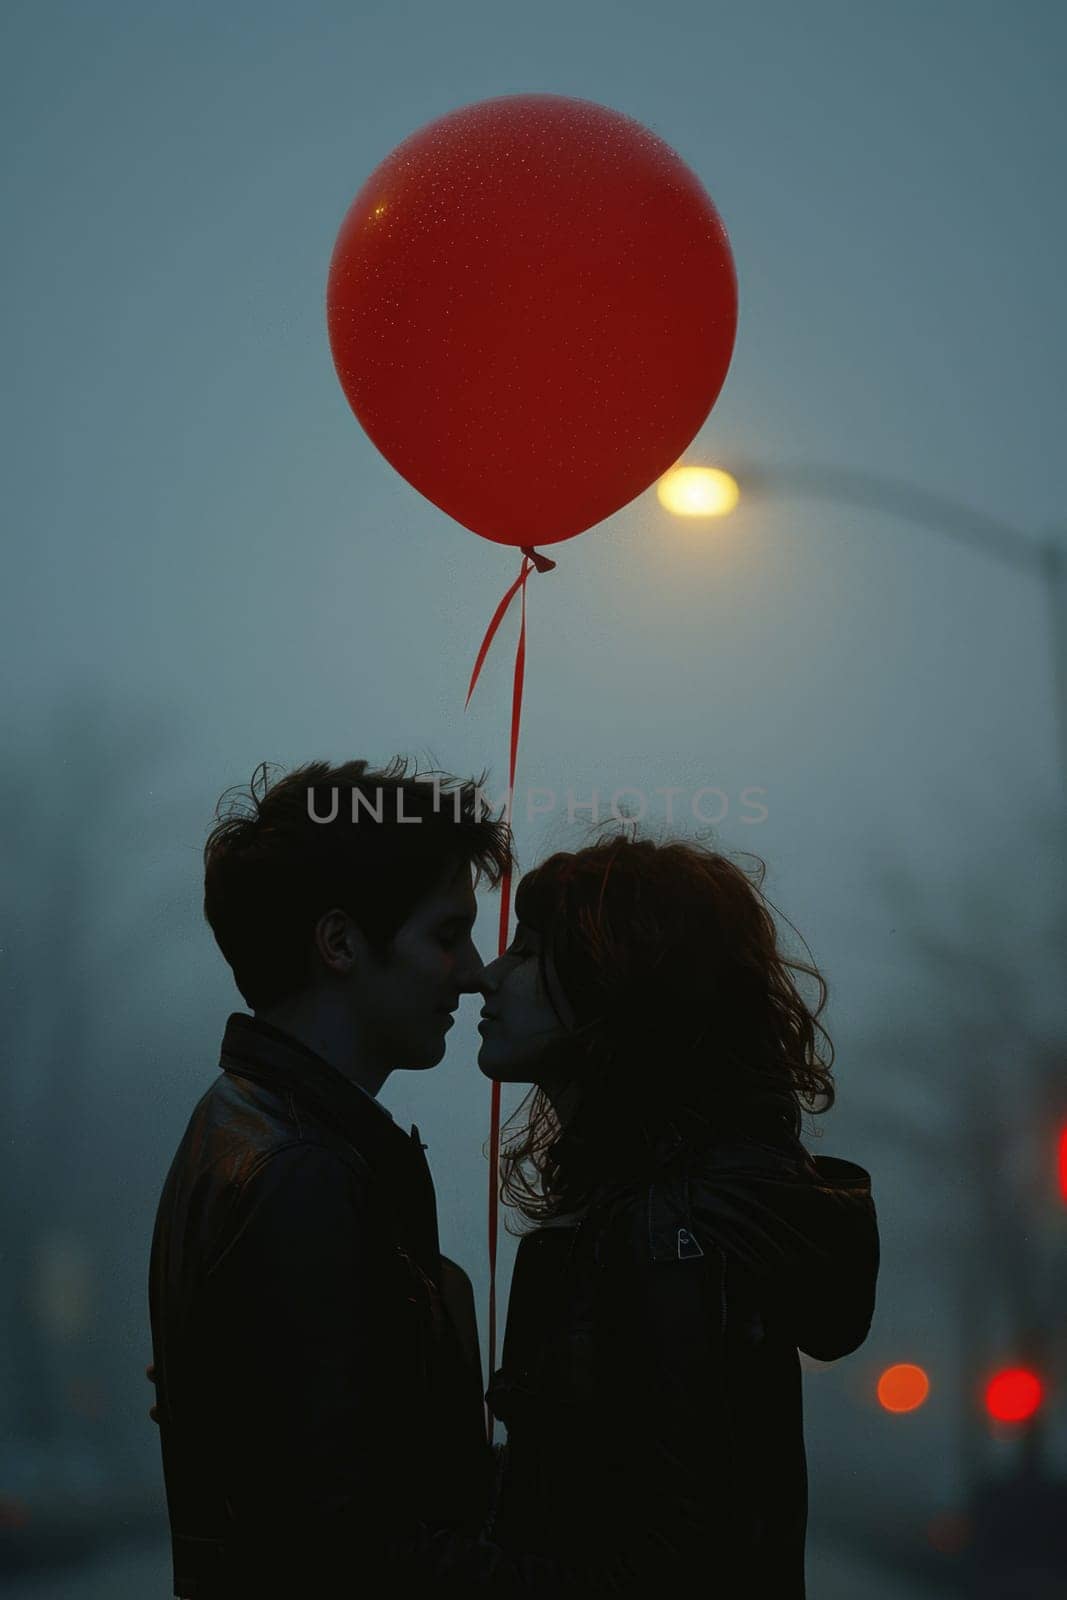 A man and a woman kissing passionately beneath a red balloon in a romantic moment.